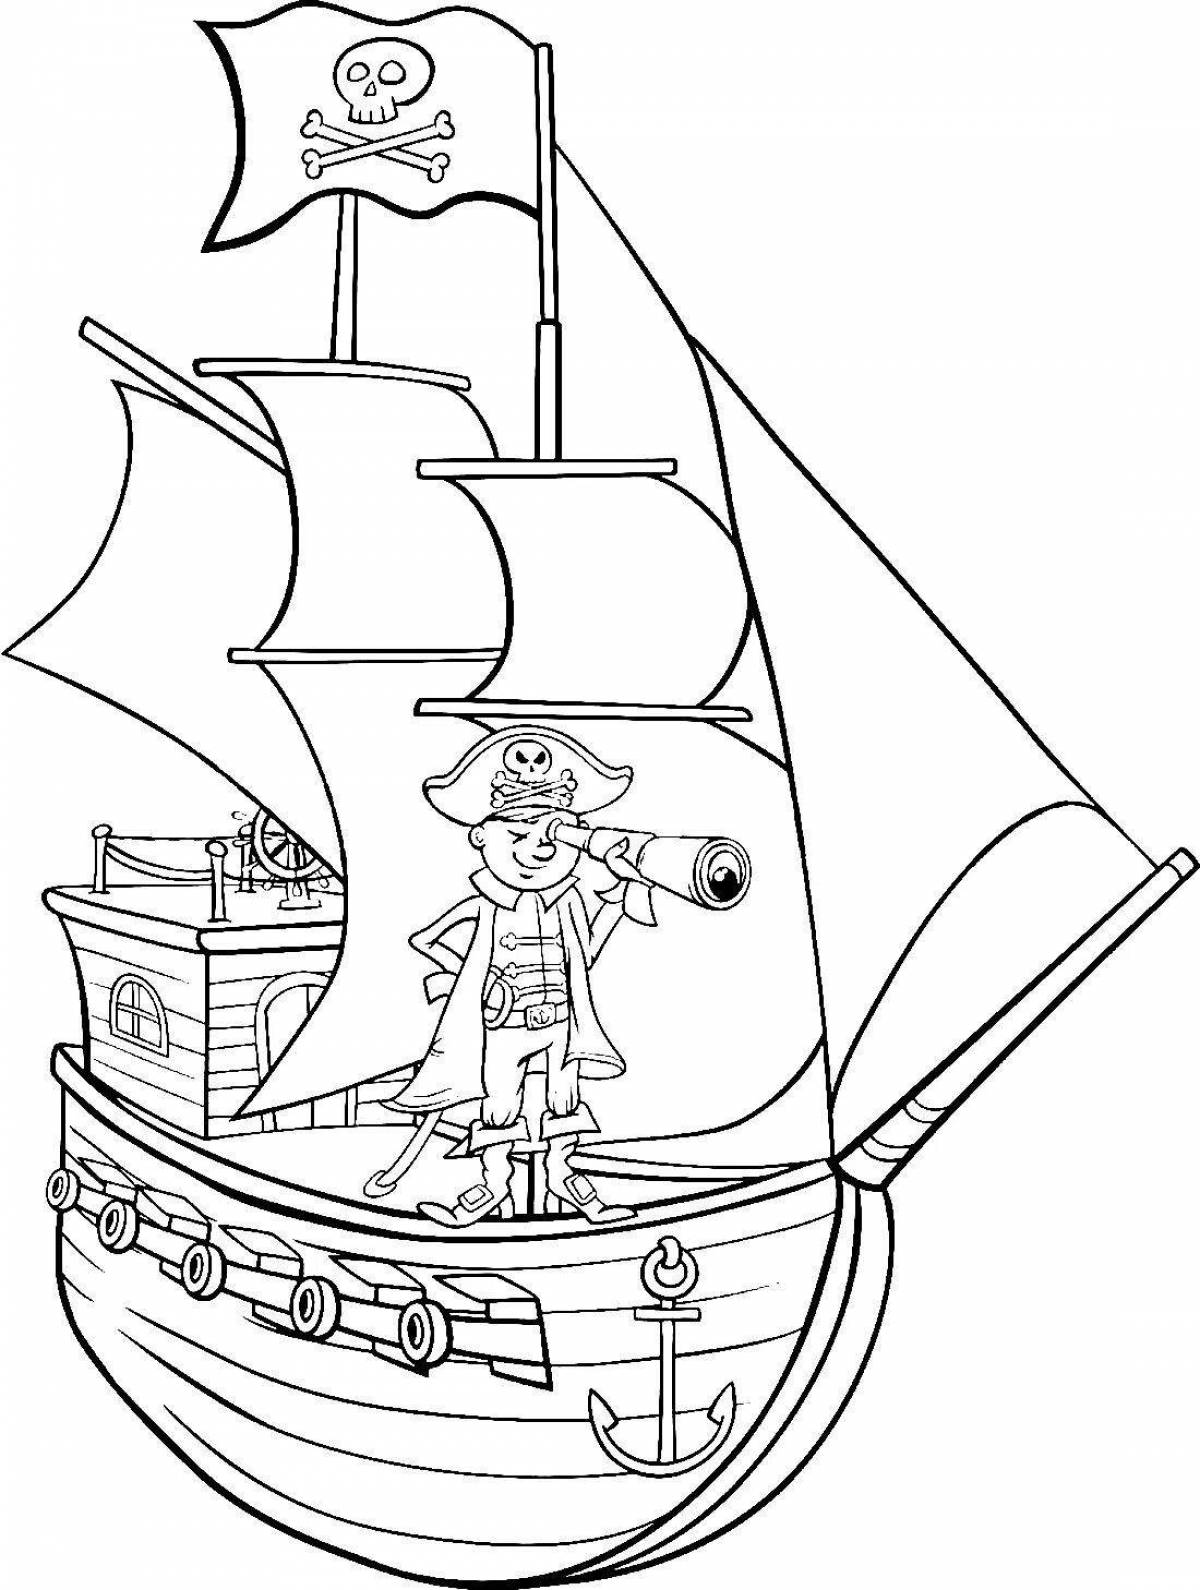 Colouring bright pirate ship for kids